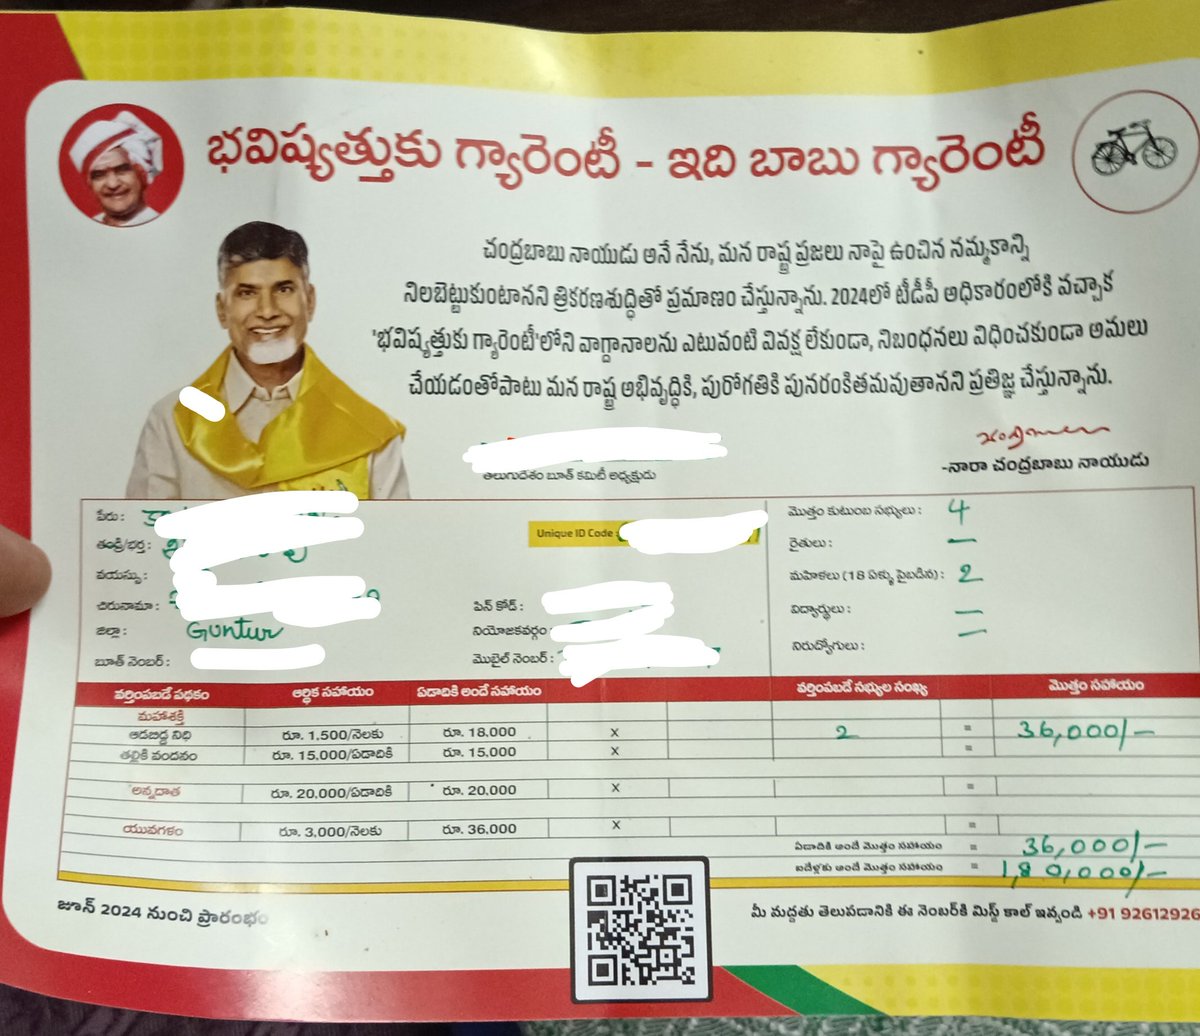 The TDPofficials are criticising  YSRCP party leaderMr. Jagan garufor providing unwantedfreebies
Howeverrecently lookedthrough the manifestoin which TDP officials offers money will begiven to families whichshows handwrittennotes on pamplet Itshockedme tdp alsogiving freebies#YCP